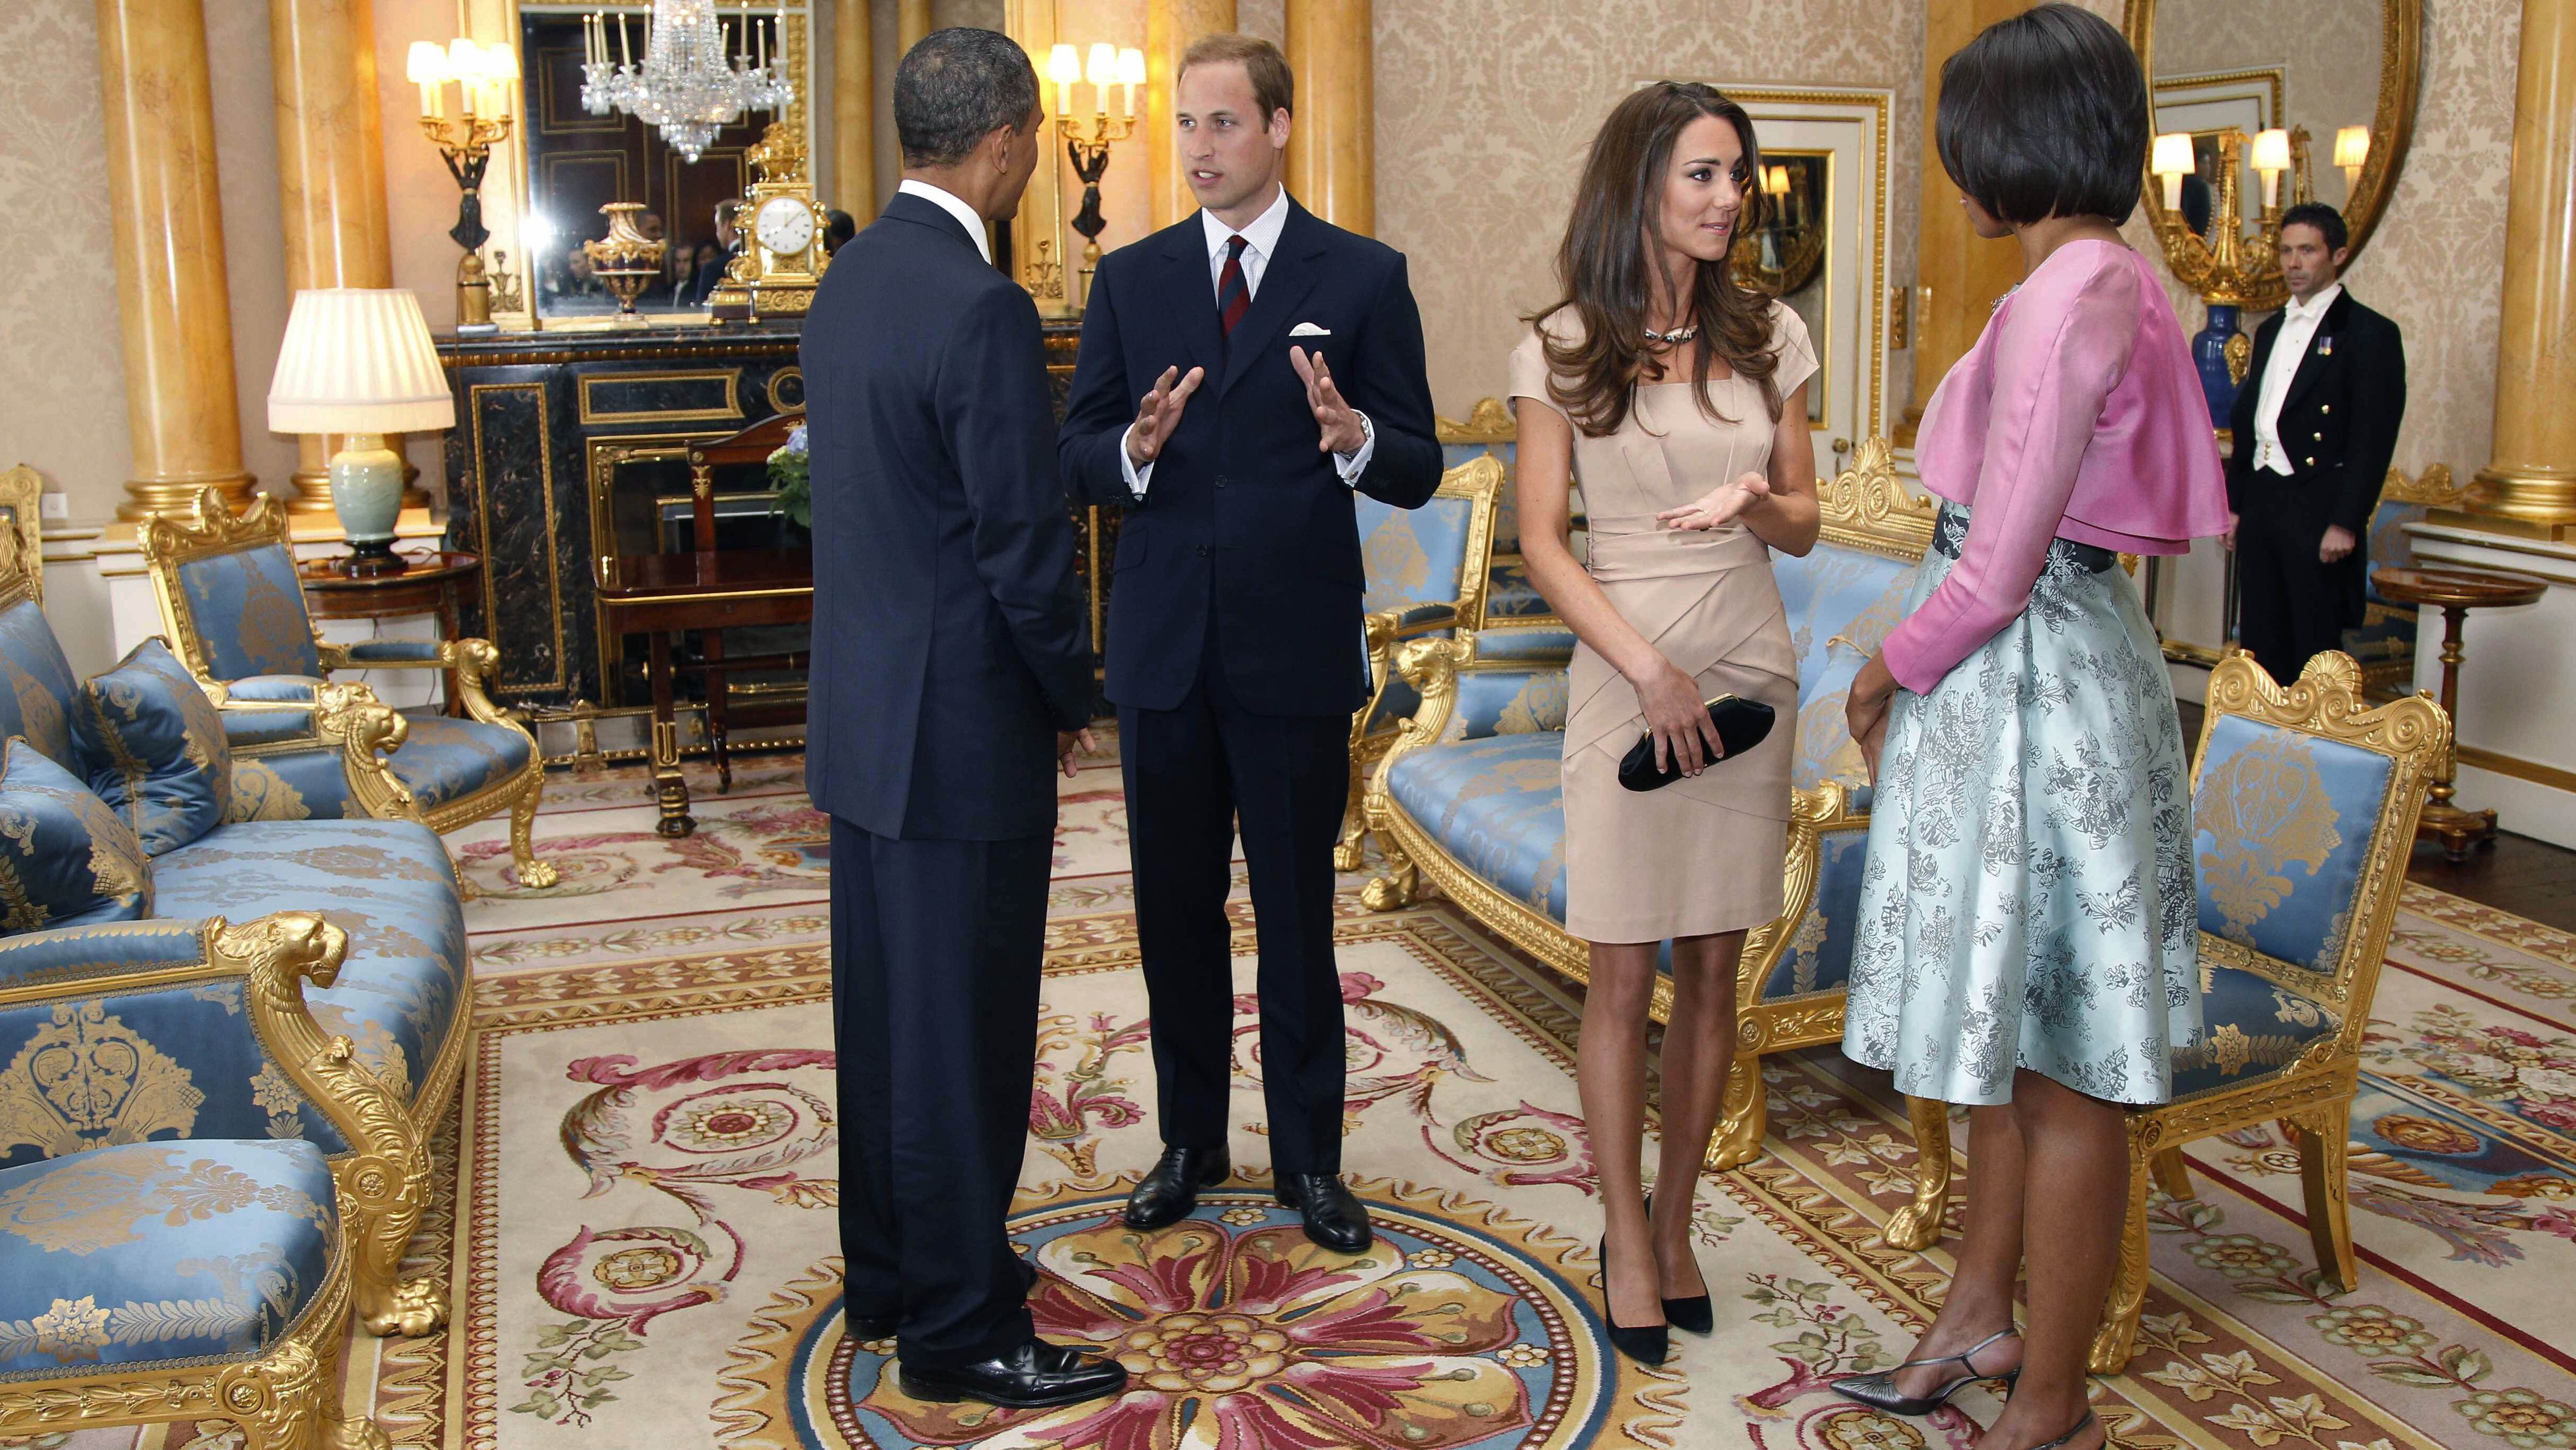 William and Catherine meet with US President Barack Obama and first lady Michelle Obama while the Obamas visited Buckingham Palace in May 2011.